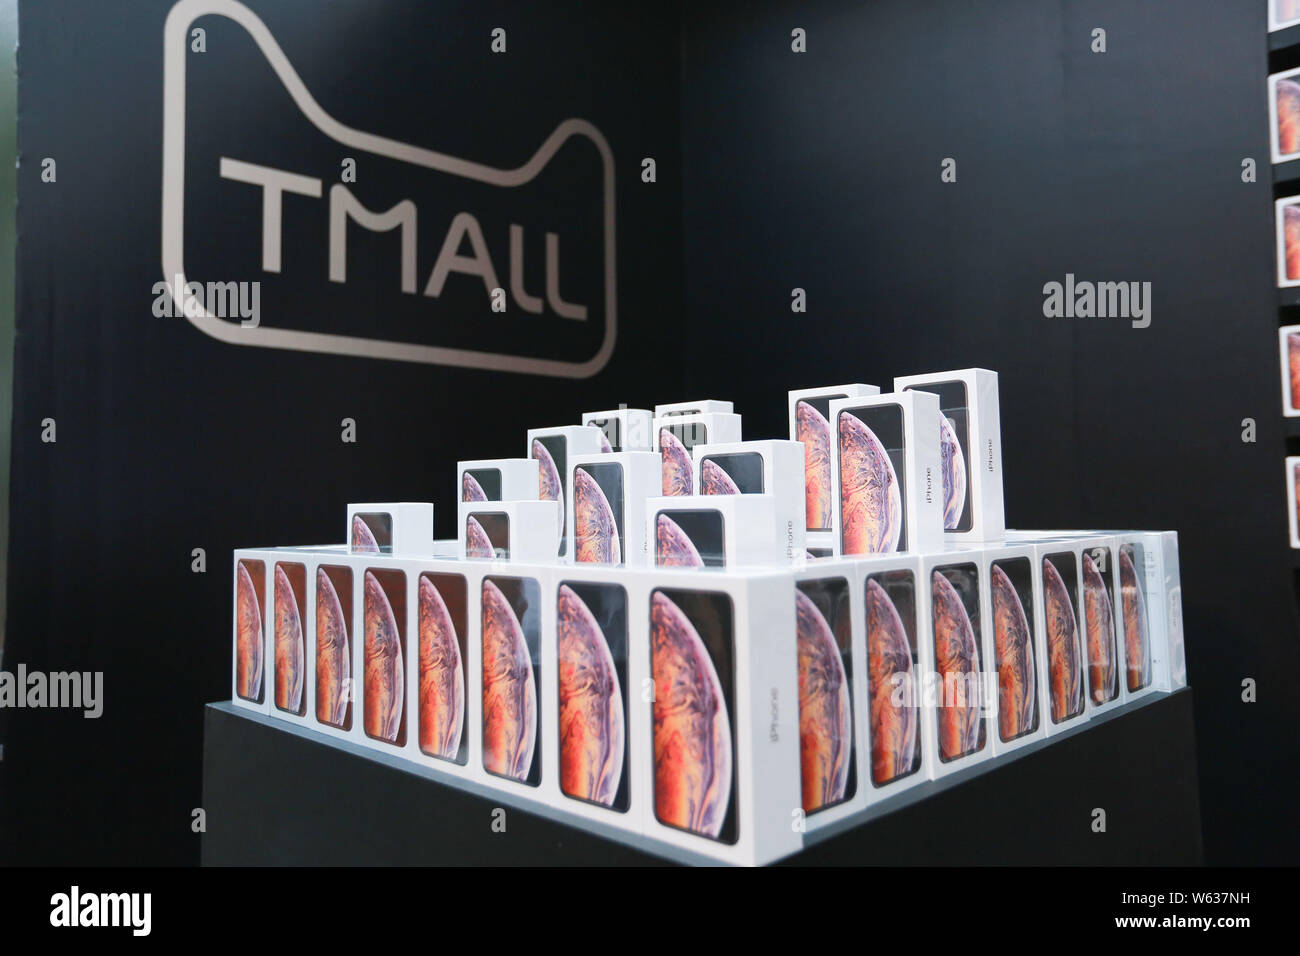 Apple iPhone XS, iPhone XS Max smartphones are on display at the offline pick-up event of Tmall, the online shopping platform of Chinese e-commerce gi Stock Photo